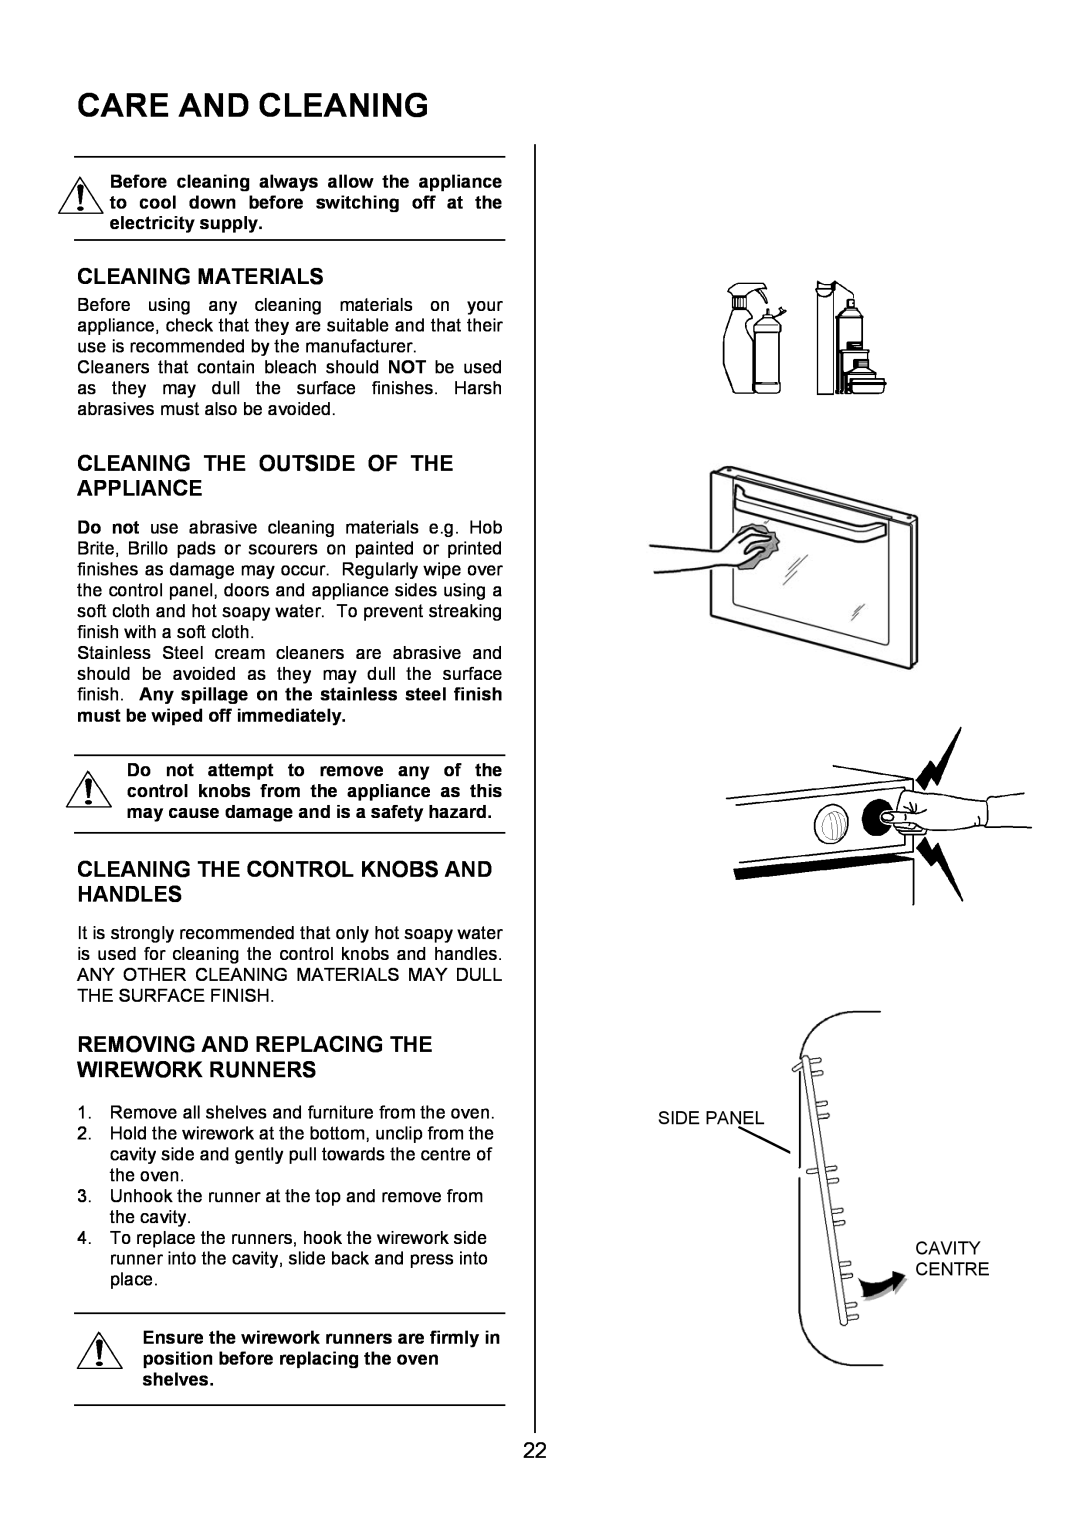 Electrolux EIKG6047, EIKG6046 user manual Care And Cleaning, Cleaning Materials, Cleaning The Outside Of The Appliance 